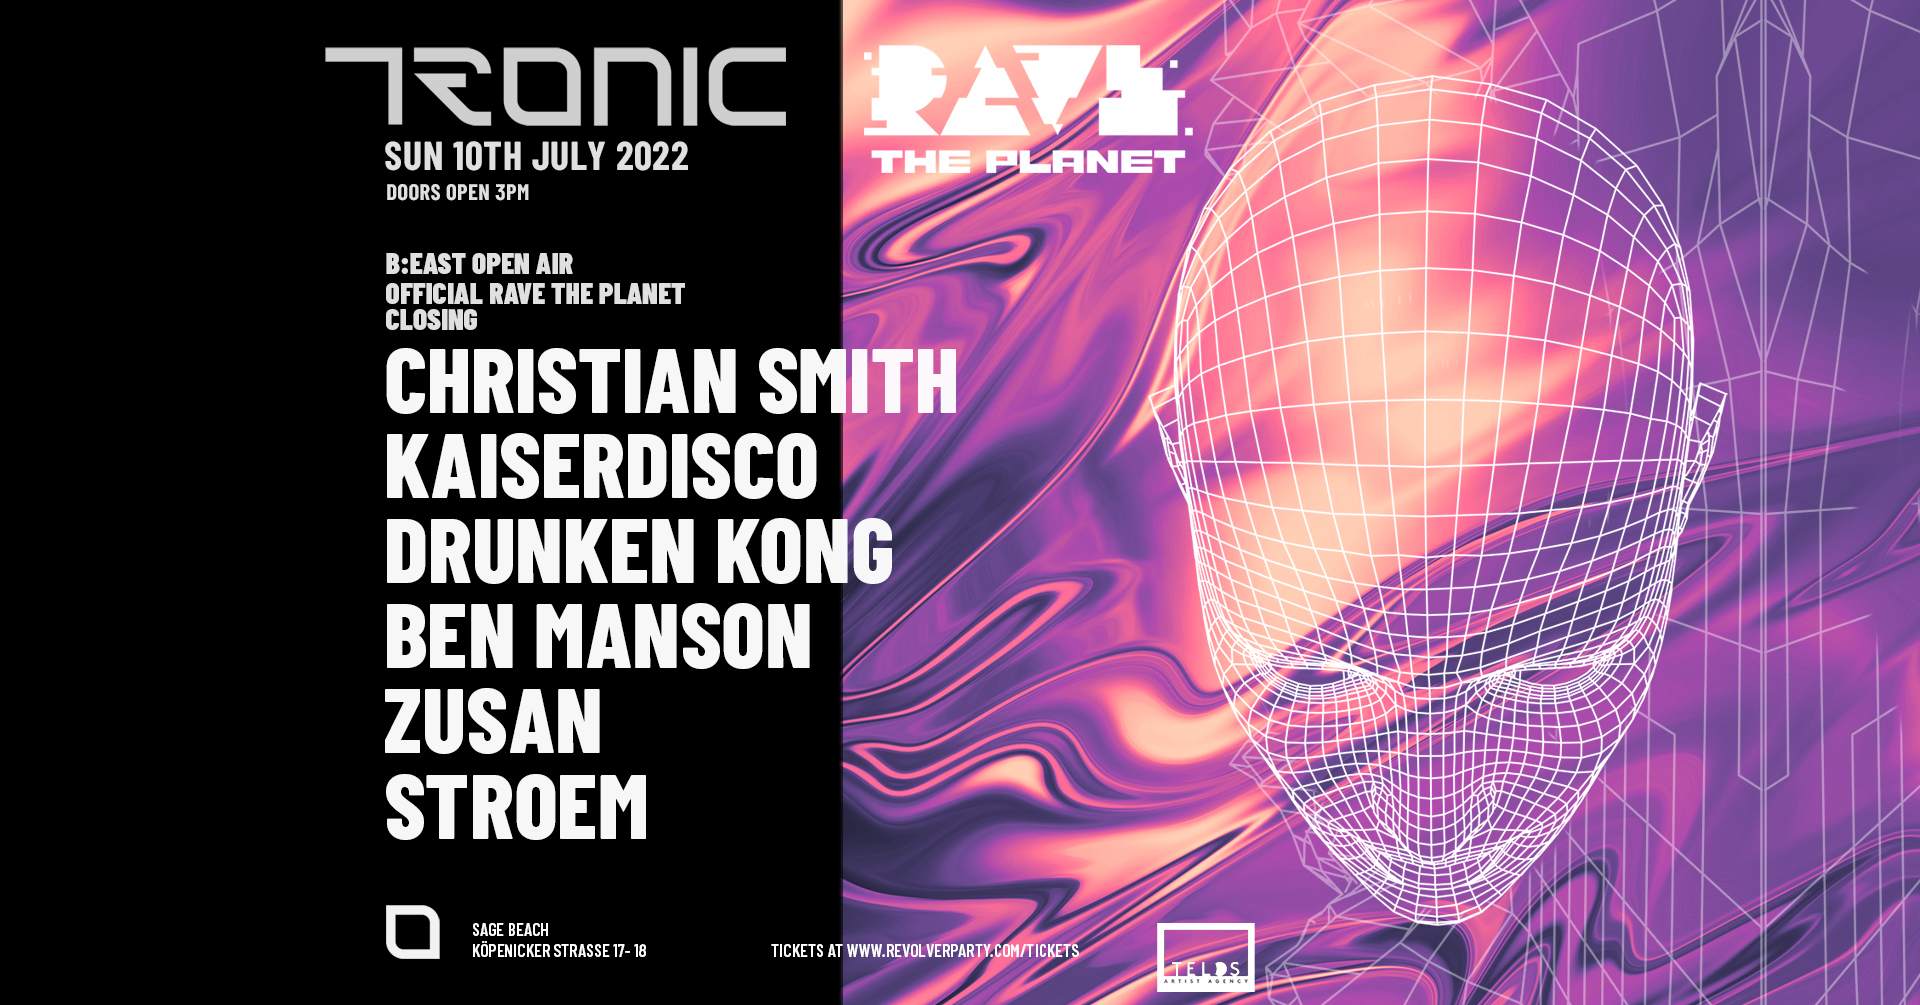 Official Rave the Planet Closing Party: B:EAST OPEN AIR / with Christian Smith/ Drunken Kong/ - Página frontal